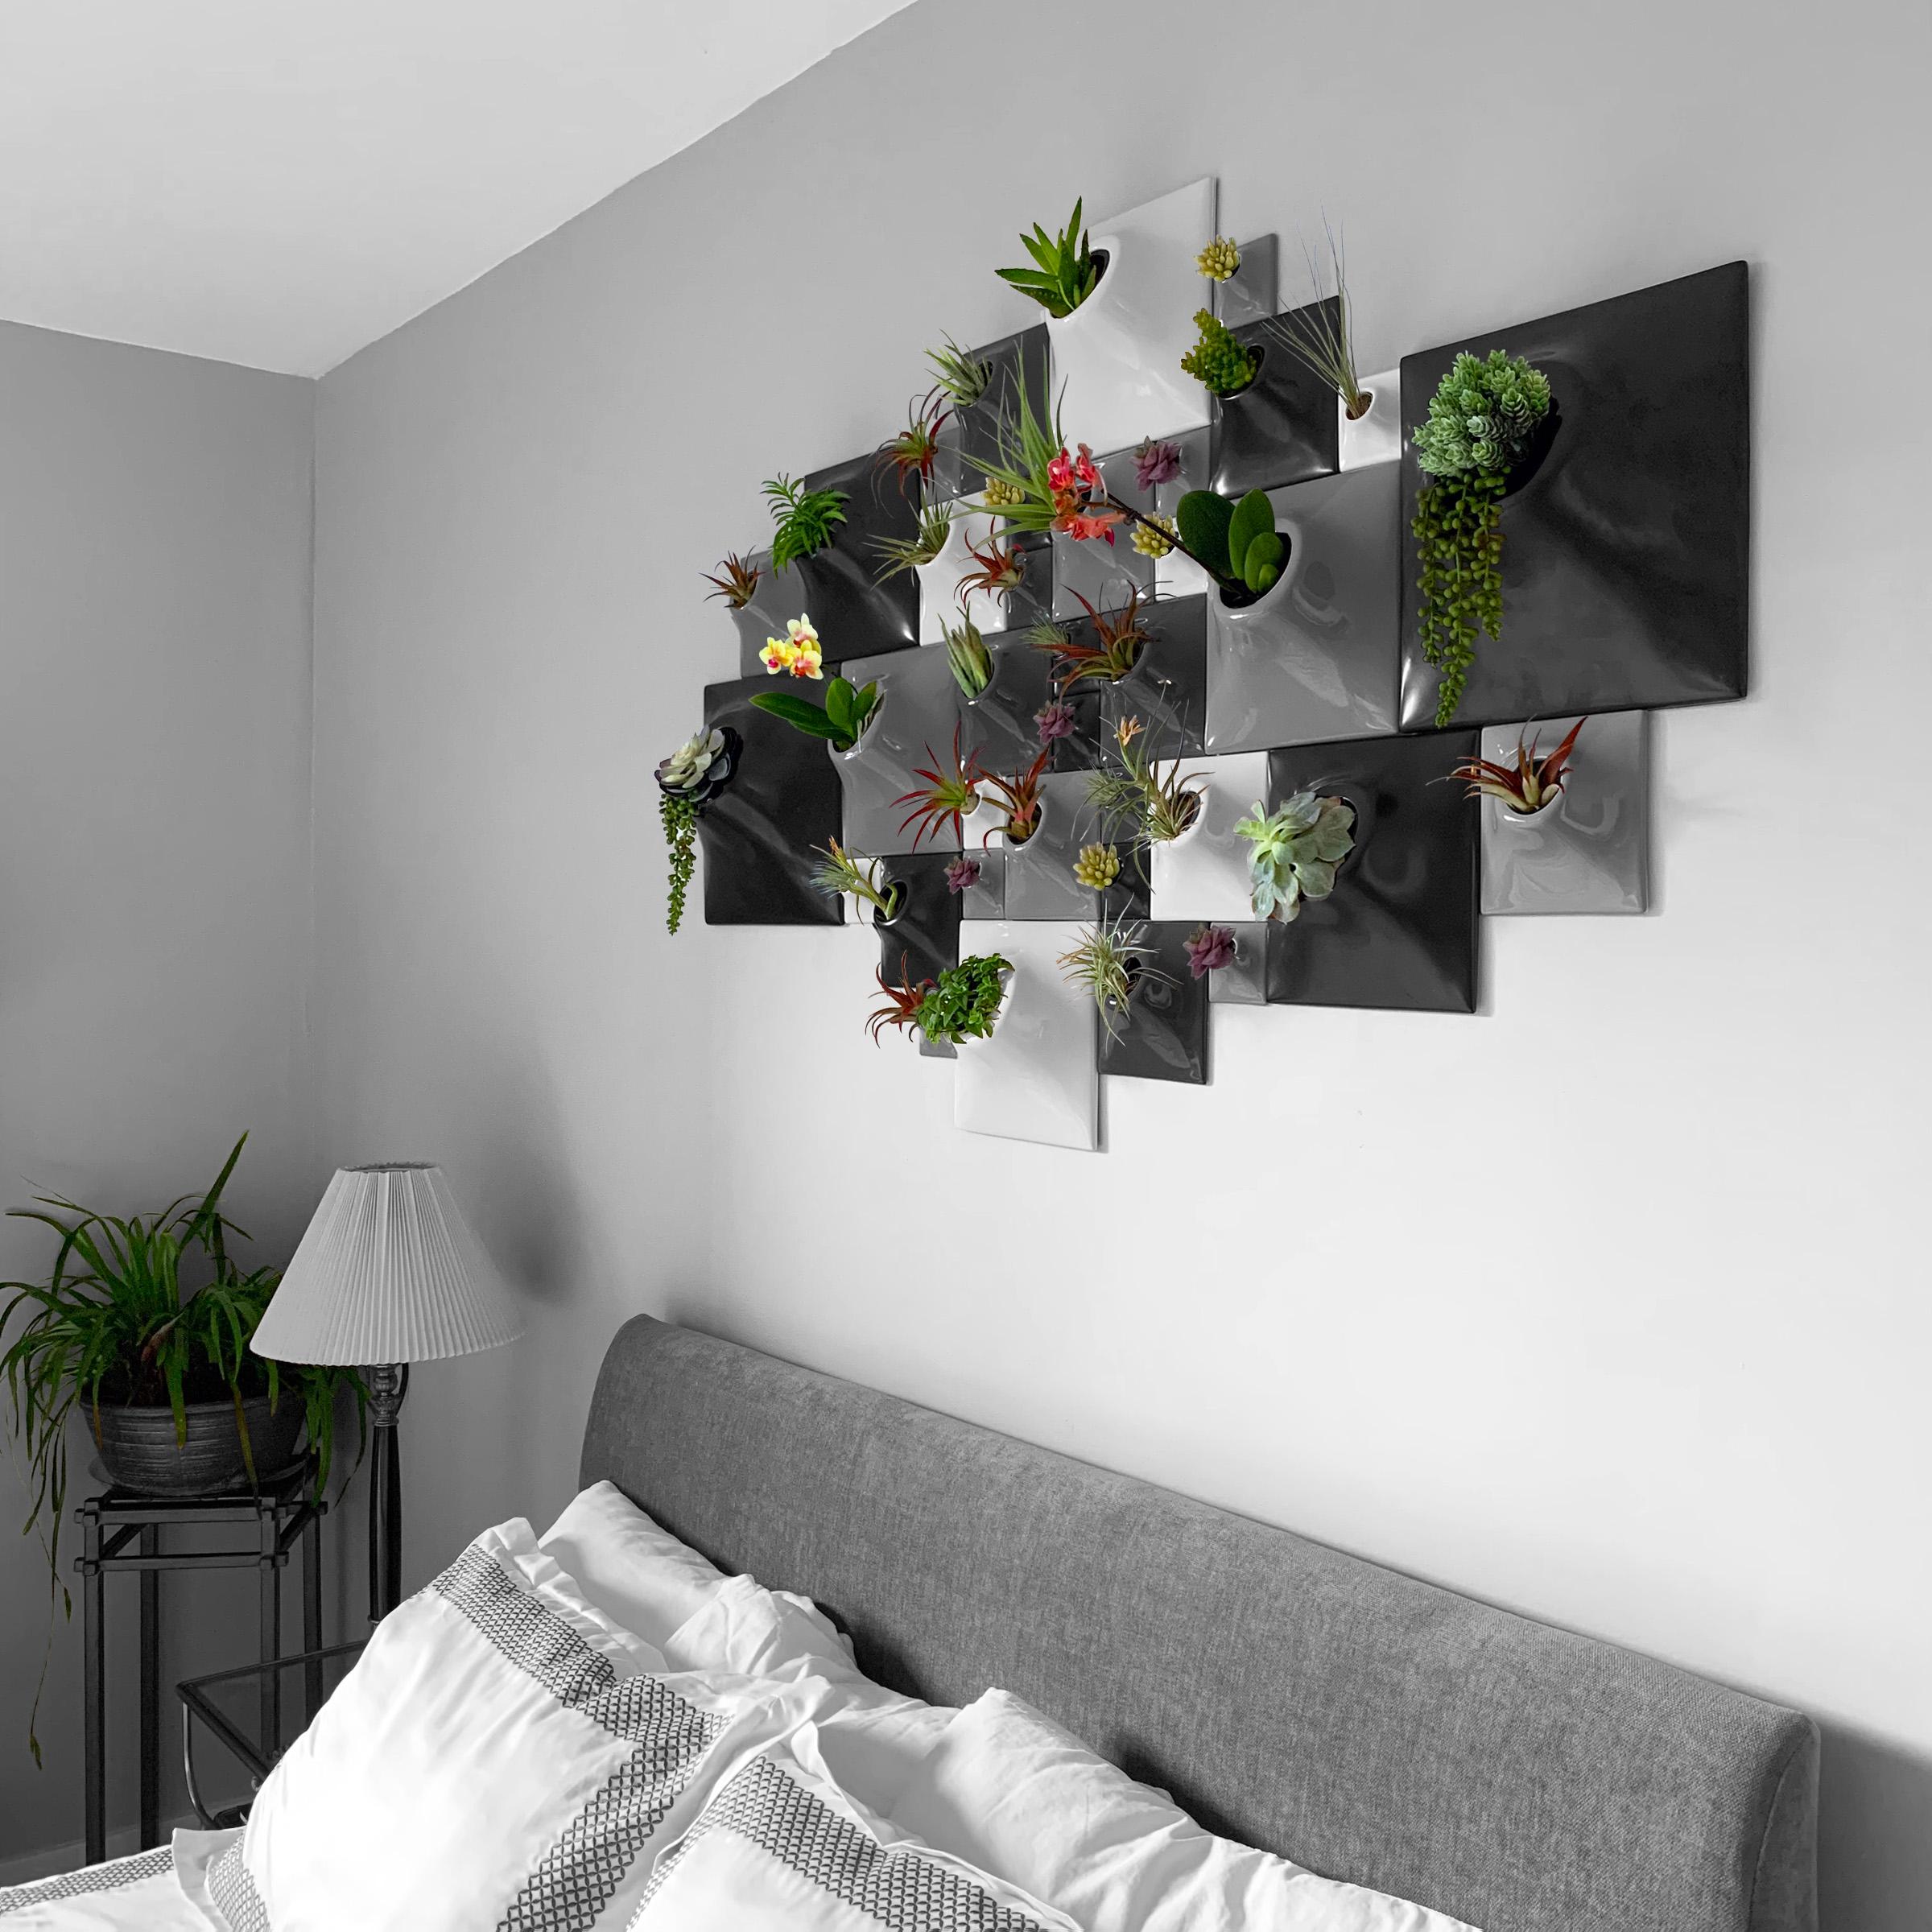 Modern Greenwall Sculpture, Plant Wall Art, Biophilic Wall Decor, Price / Sq Ft In New Condition For Sale In Bridgeport, PA